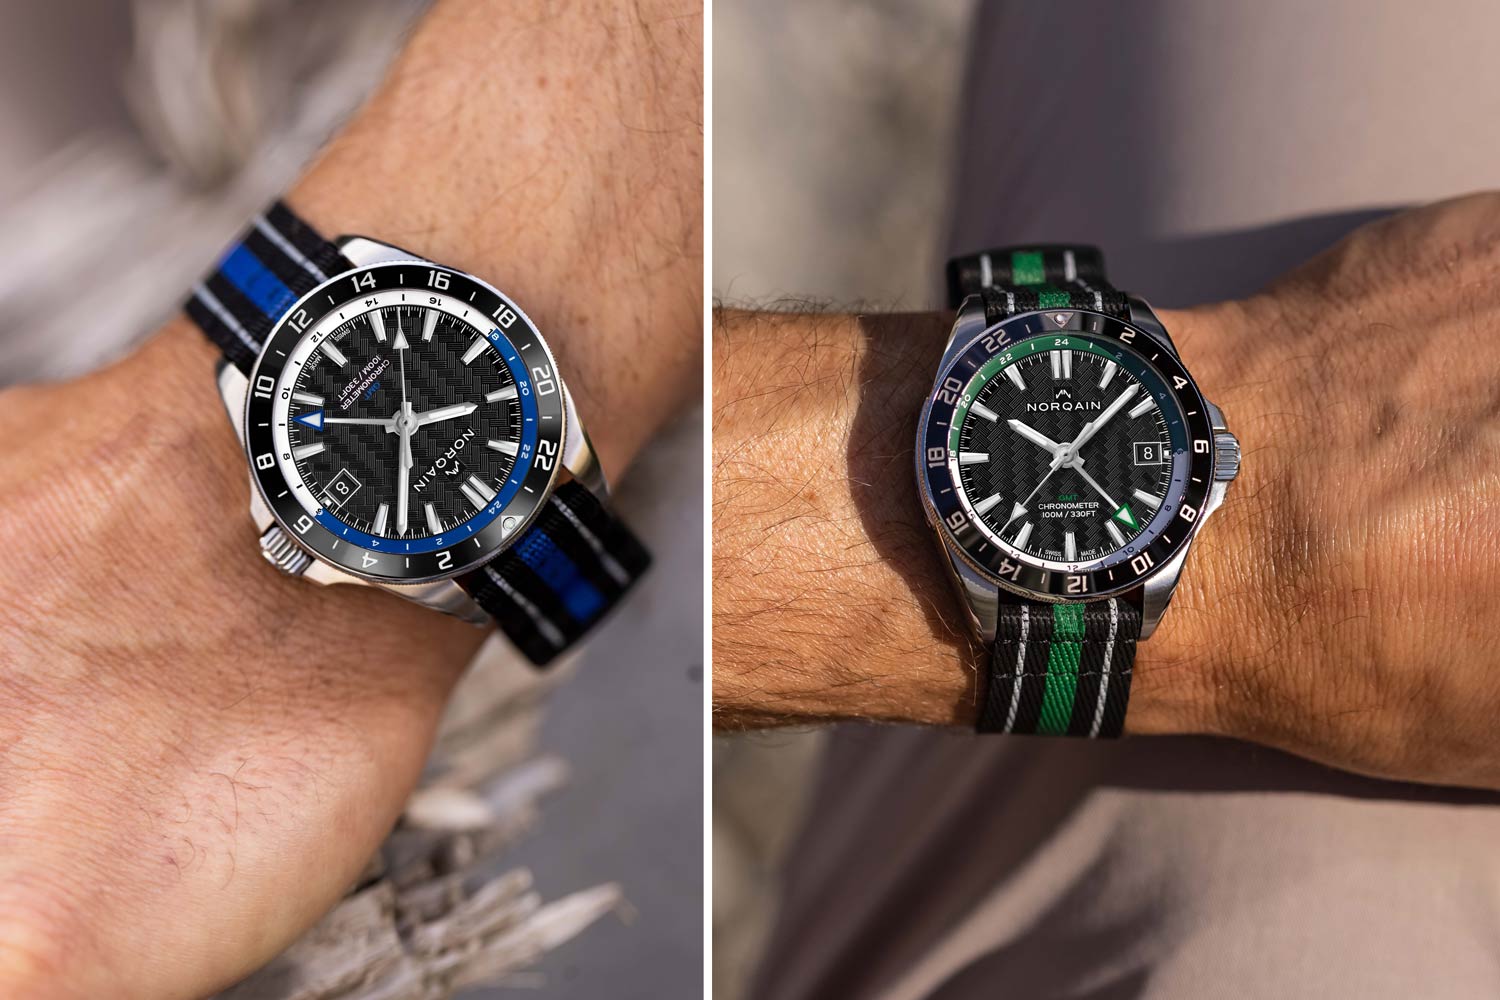 The non-DLC models come in Royal Blue or Forest Green, easily identified by the splash of color appropriate to each watch to represent night time hours on the GMT hour scale.